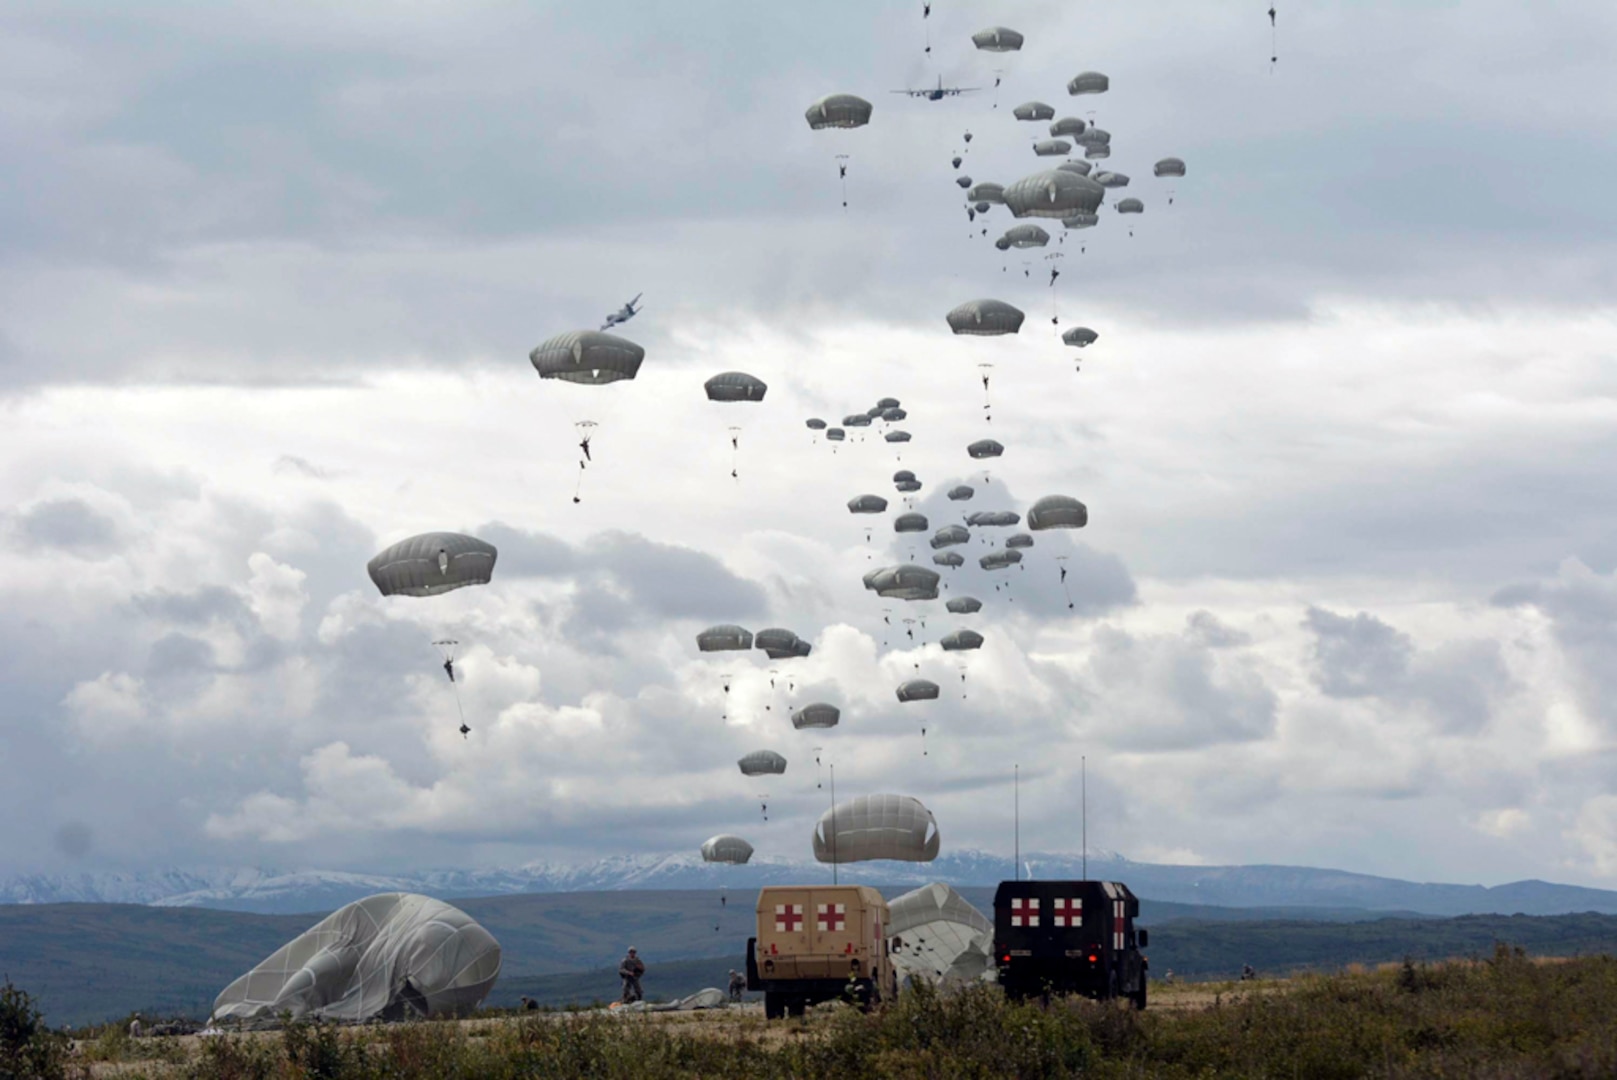 In this photo, Japan Ground Self-Defense Forces from the 1st Airborne Brigade and 4th Brigade (Airborne), 25th Infantry Division paratroopers perform an airborne insertion and airfield seizure at Fort Greely, Alaska, Aug. 12. This event was part of Exercise Arctic Aurora 2015. 